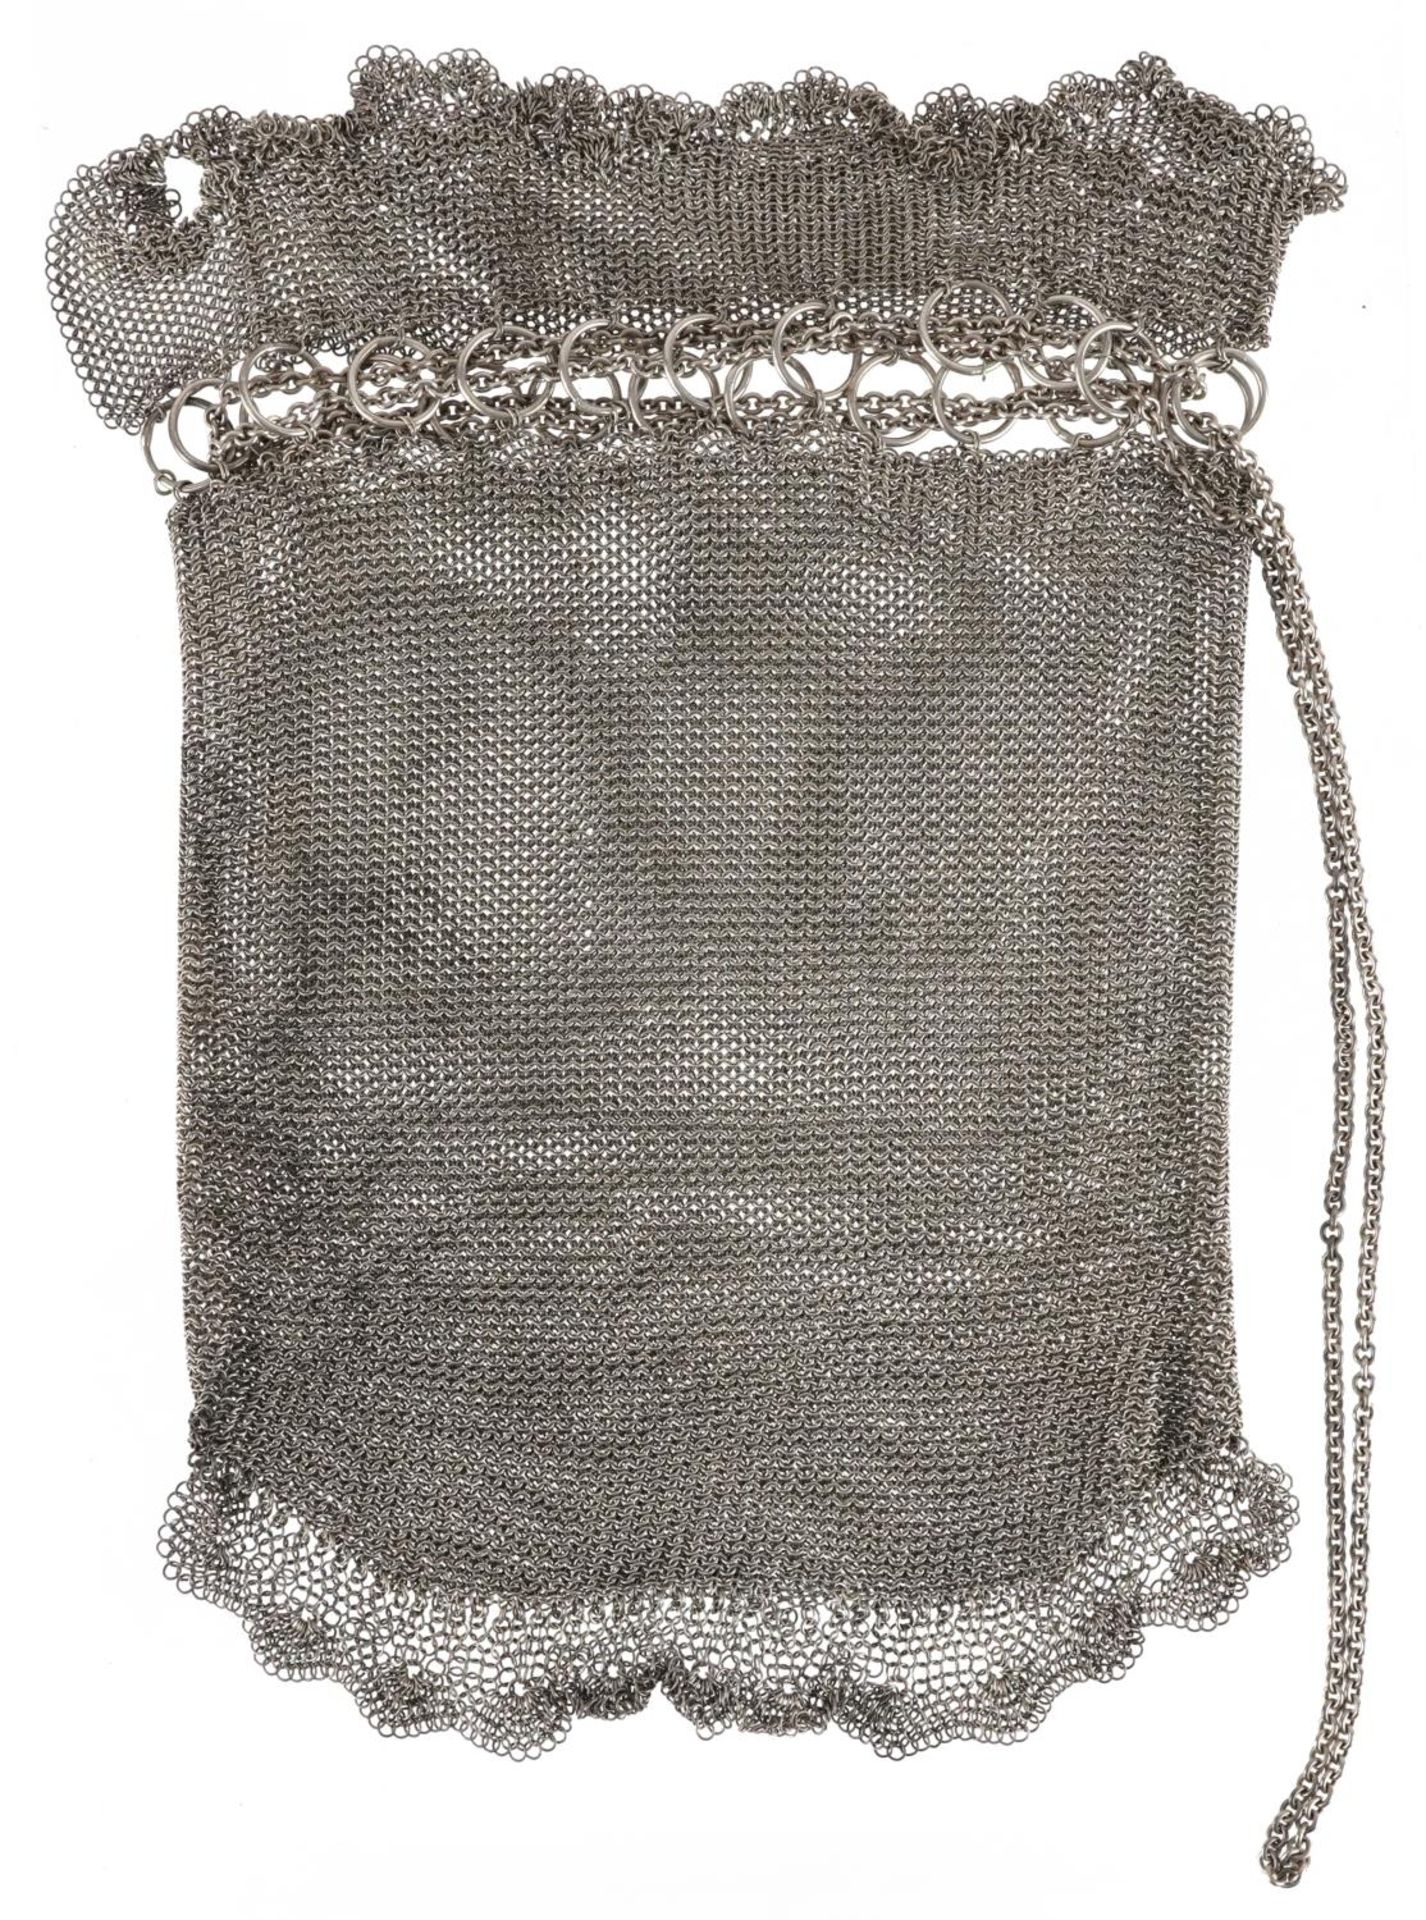 Victorian unmarked silver chainmail purse, 16cm in length, 129.5g - Image 3 of 3